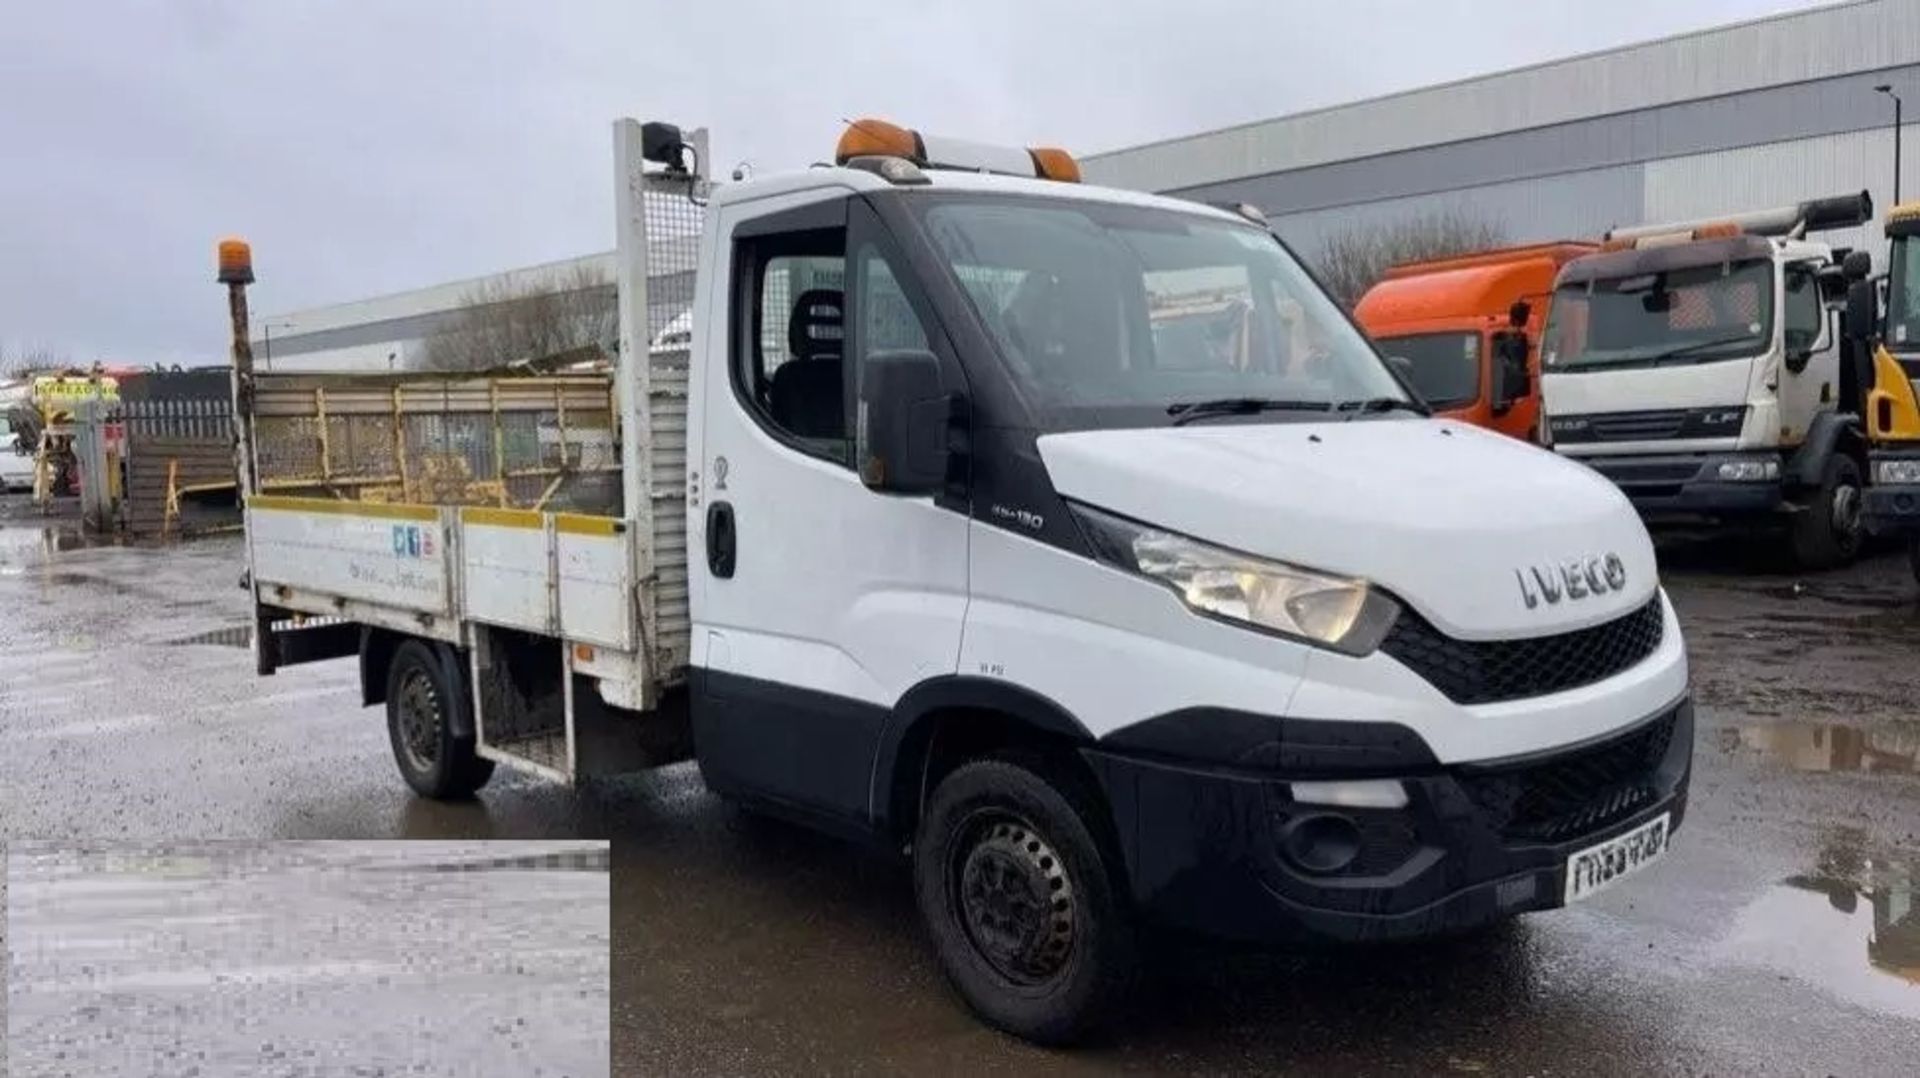 2015 IVECO DAILY DROPSIDE TRUCK - RELIABLE WORKHORSE FOR VERSATILE TRANSPORT SOLUTIONS - Image 10 of 11